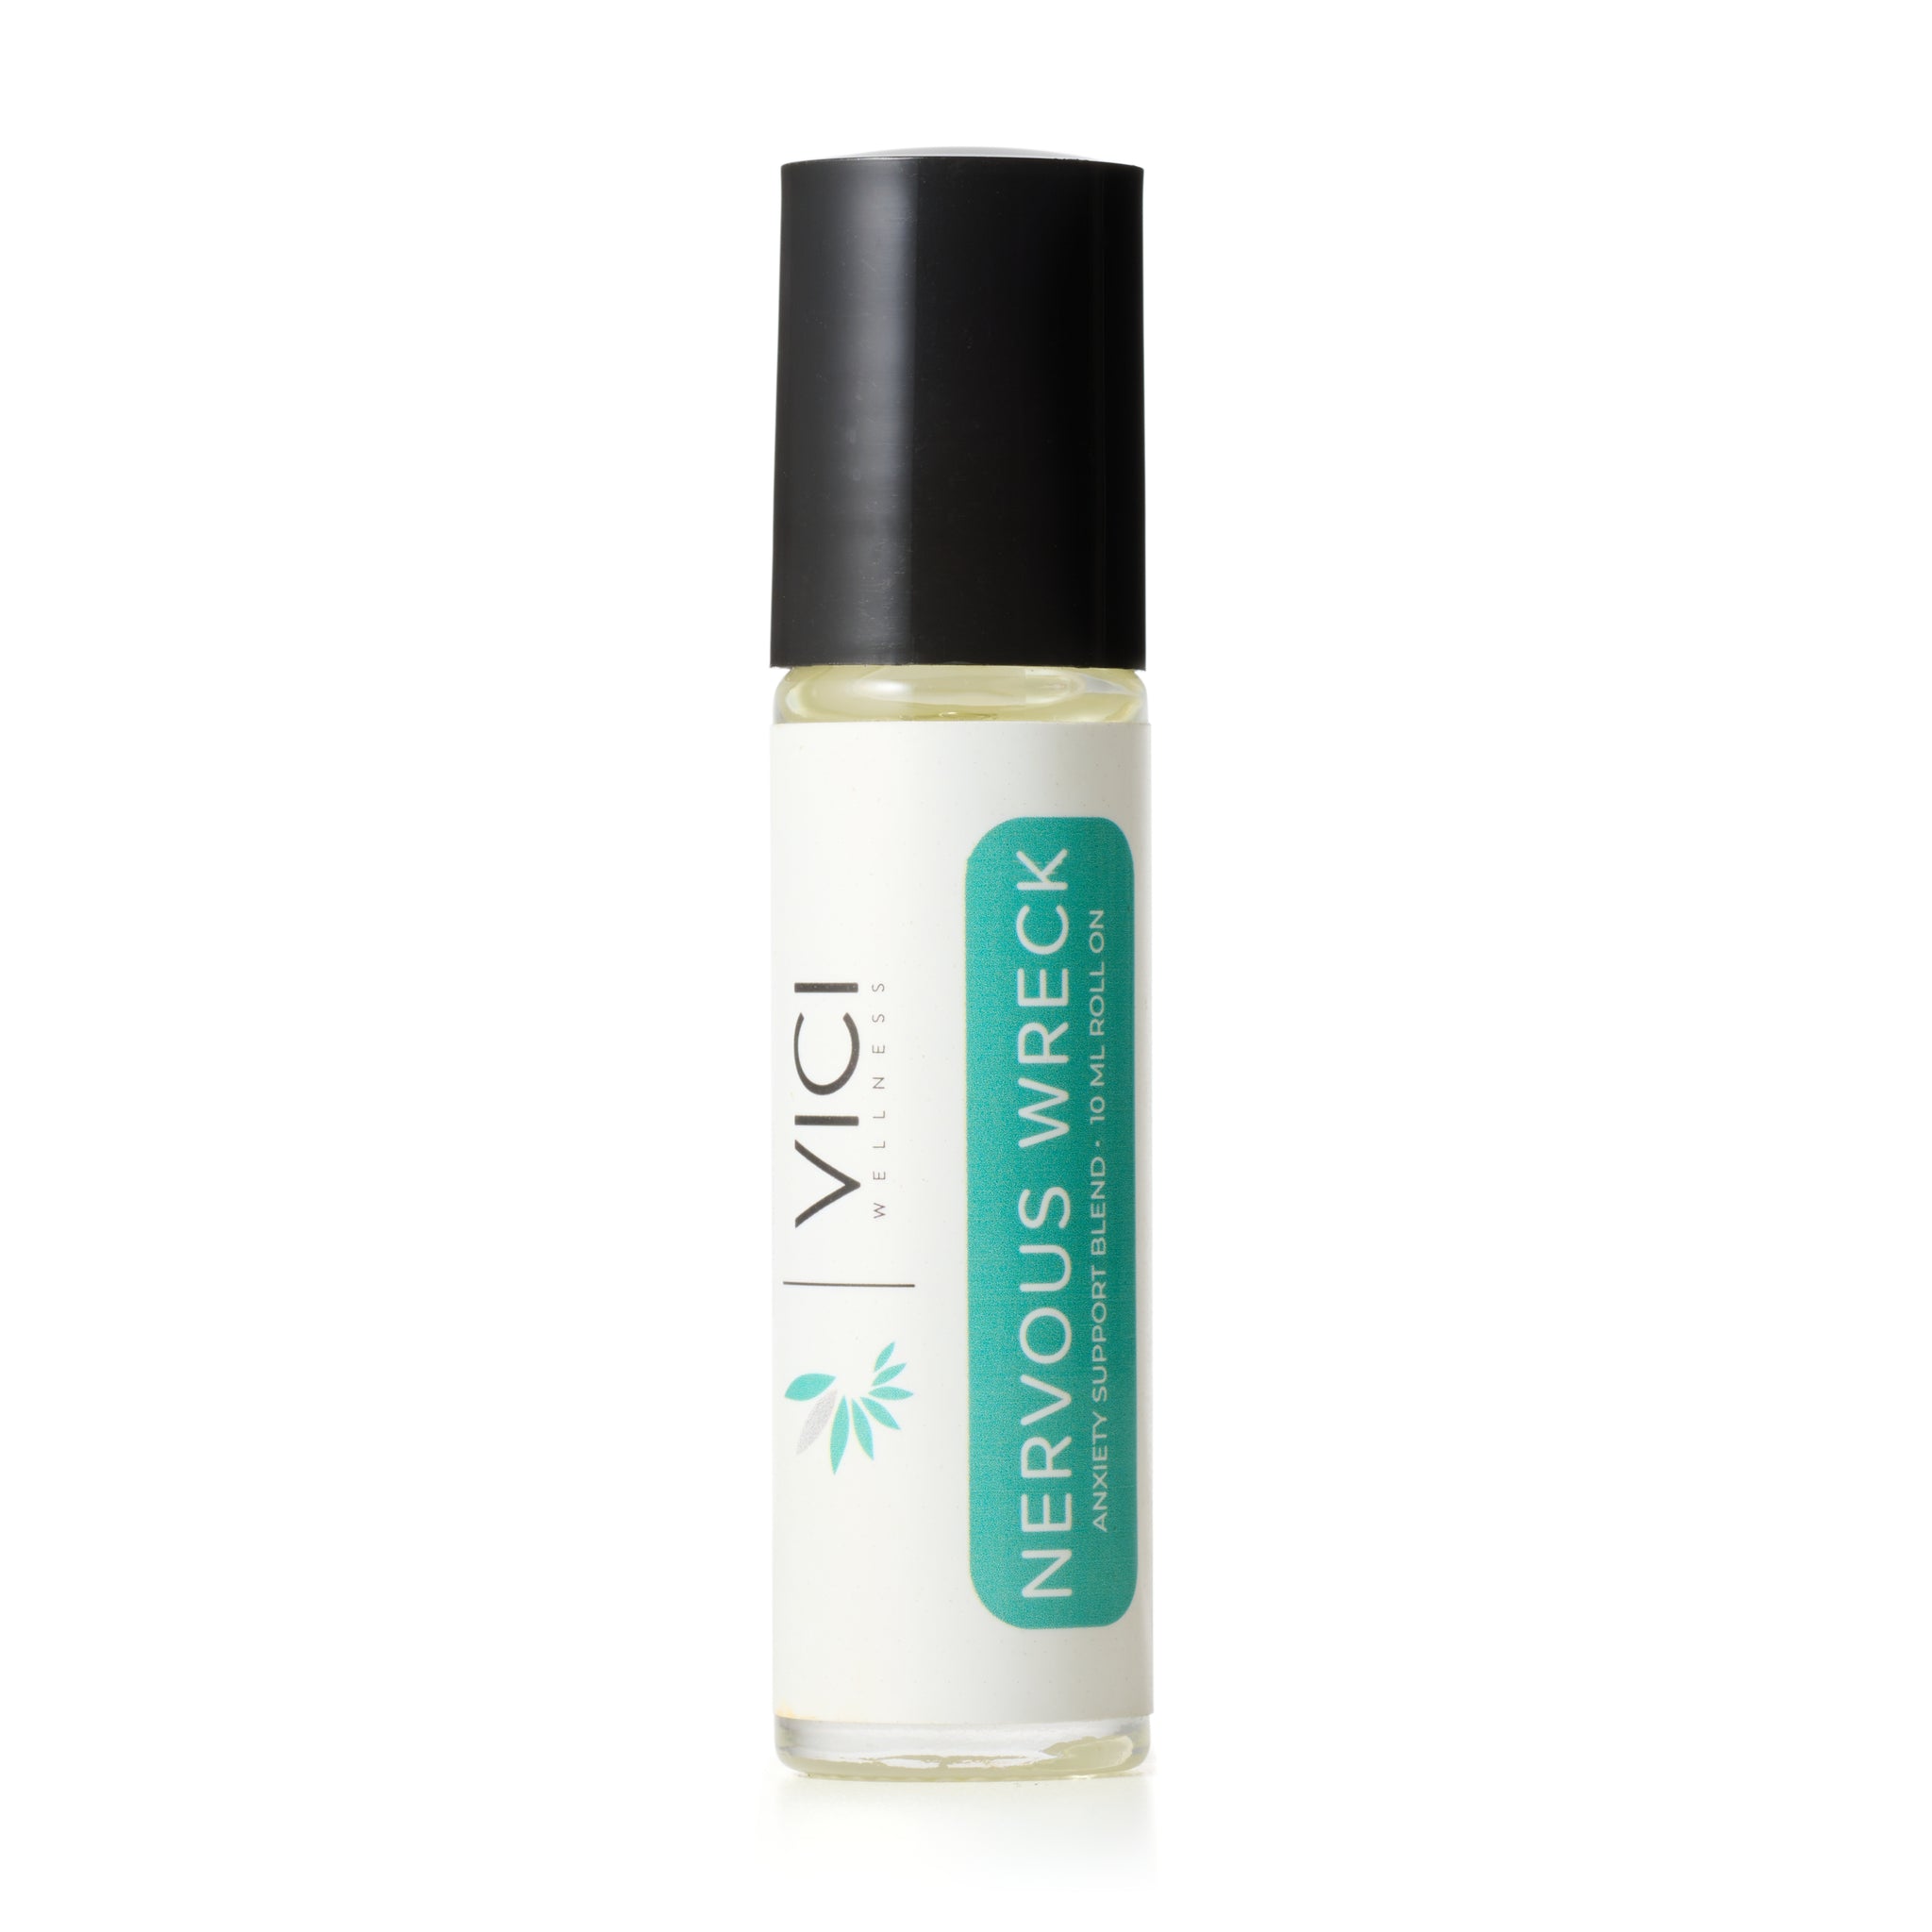 "Out of Stock" - Nervous Wreck Aromatherapy Roller